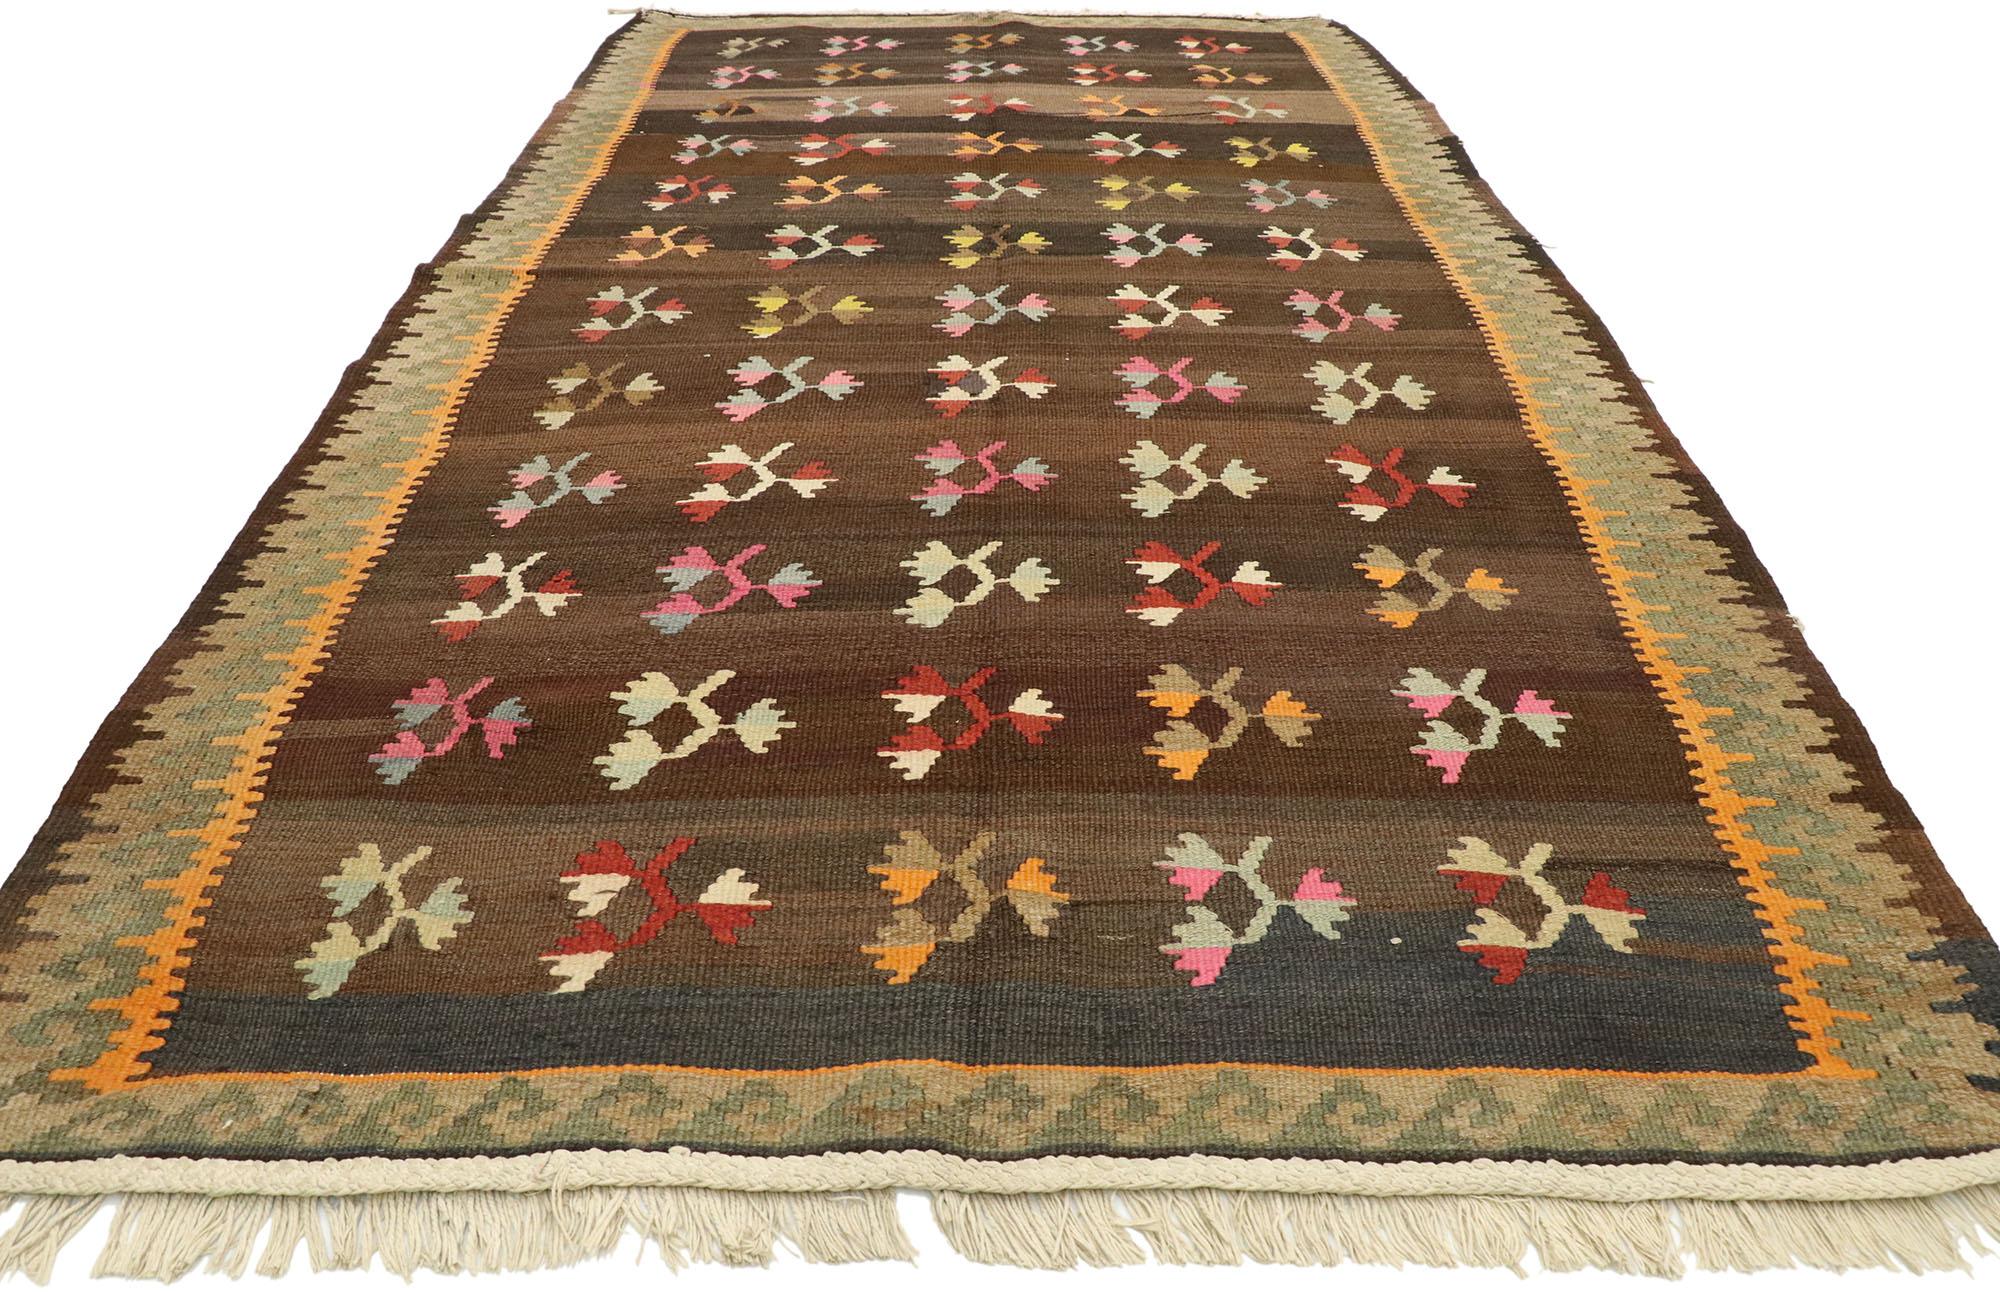 Hand-Woven Vintage Flat-Weave Turkish Floral Kilim Rug with Boho Farmhouse Style For Sale